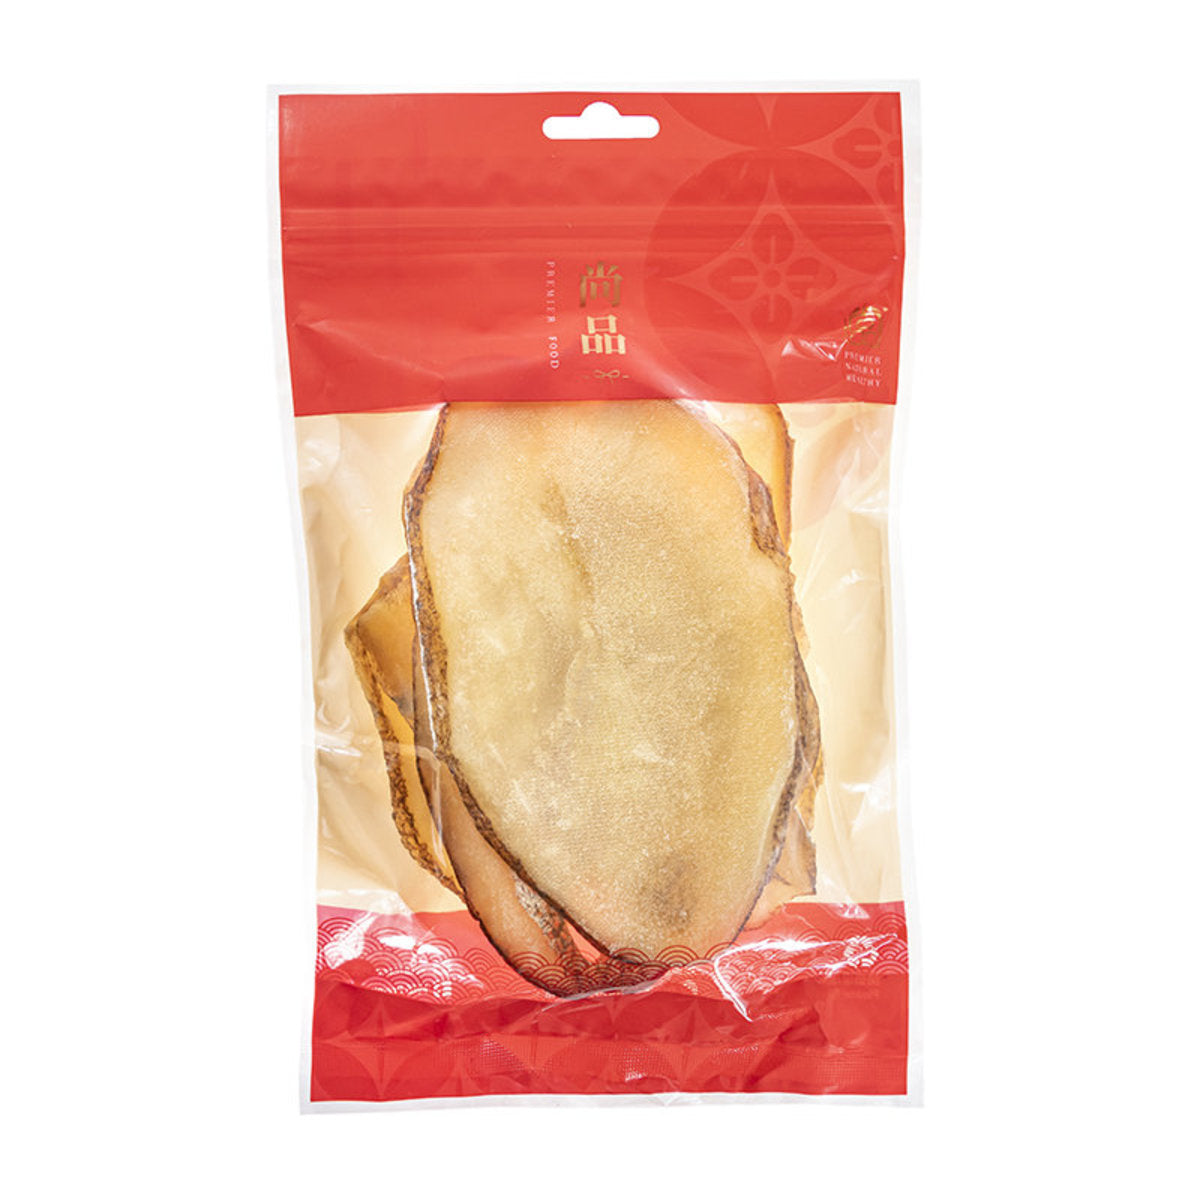 Premier Food Dried Conch Meat Slice (East Africa) 300G 尚品 東非厚螺片 300克